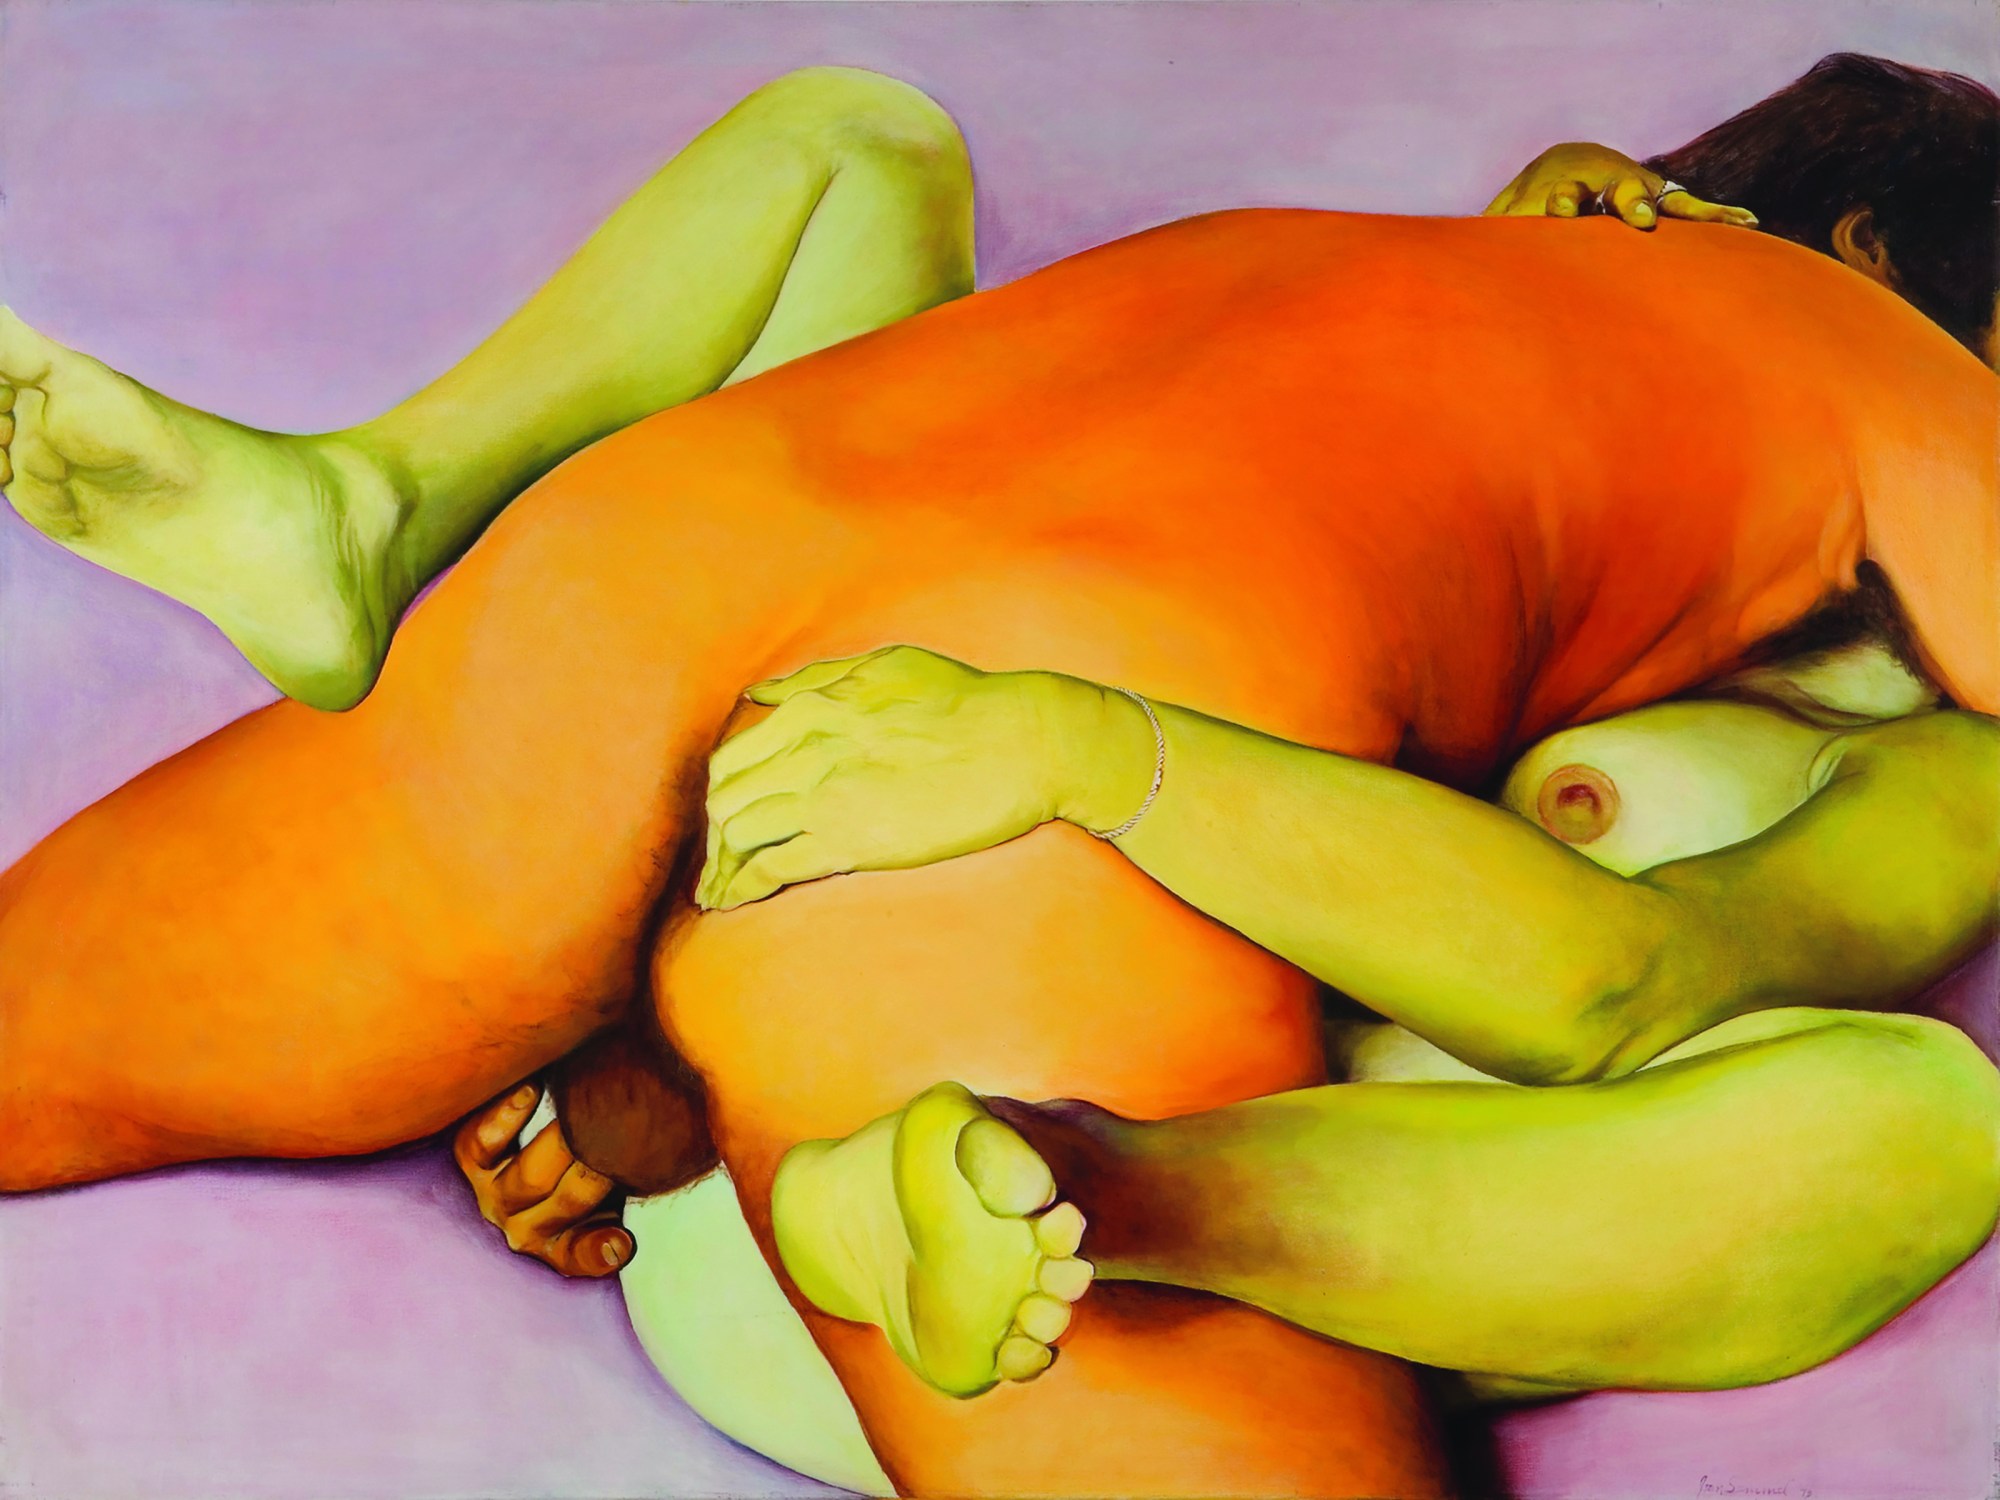 A tangerine-colored man lies on top of a chartreuse-tinted woman. They are grabbing each other's rears.